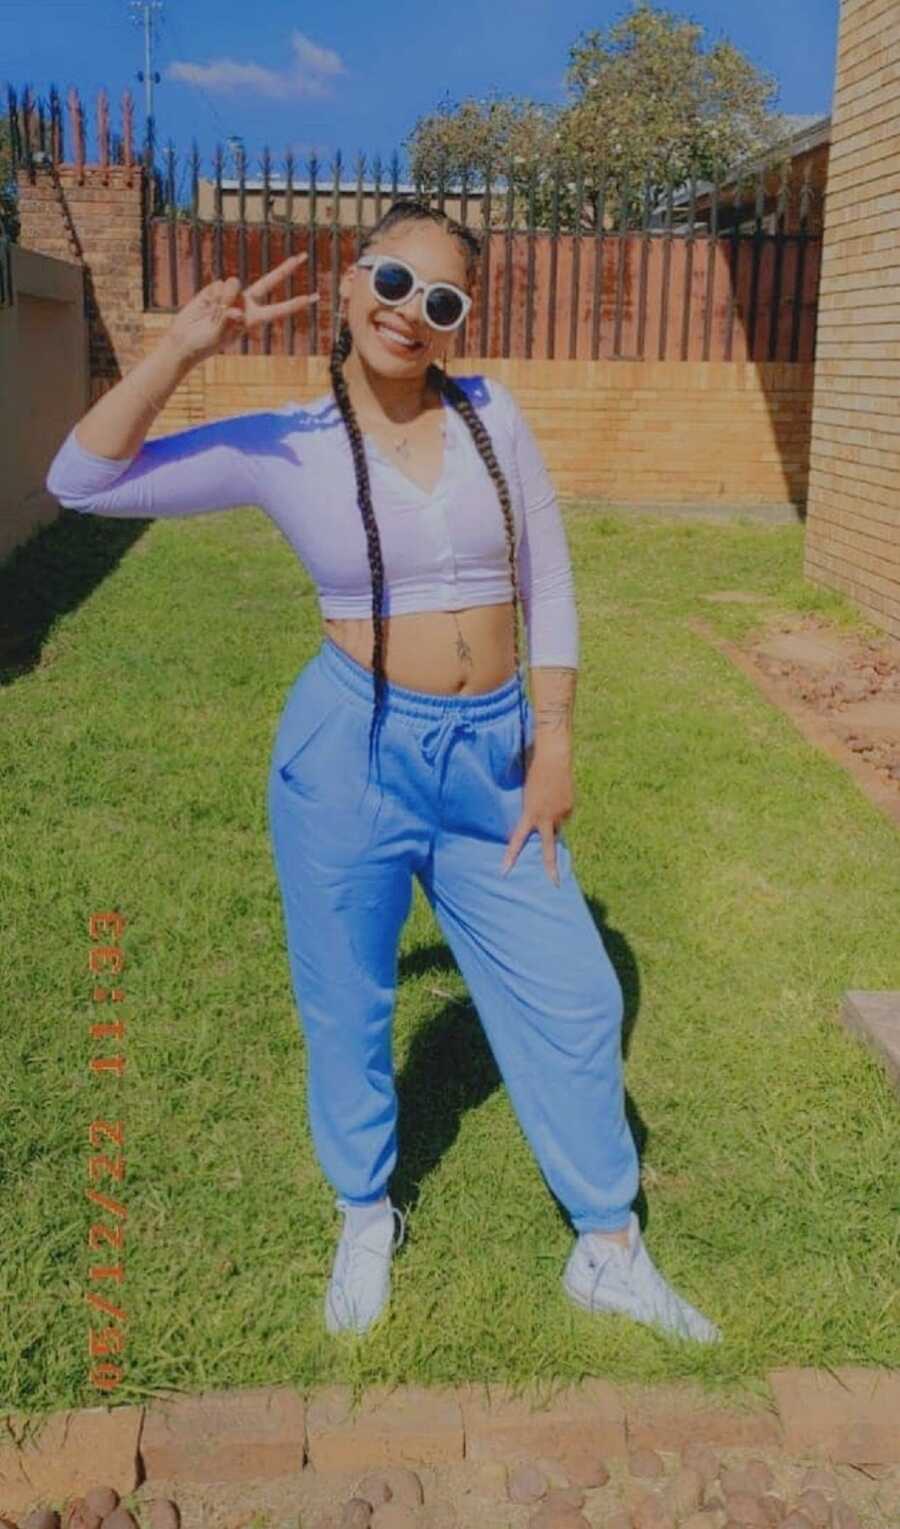 A woman stands outside wearing a crop top and blue pants